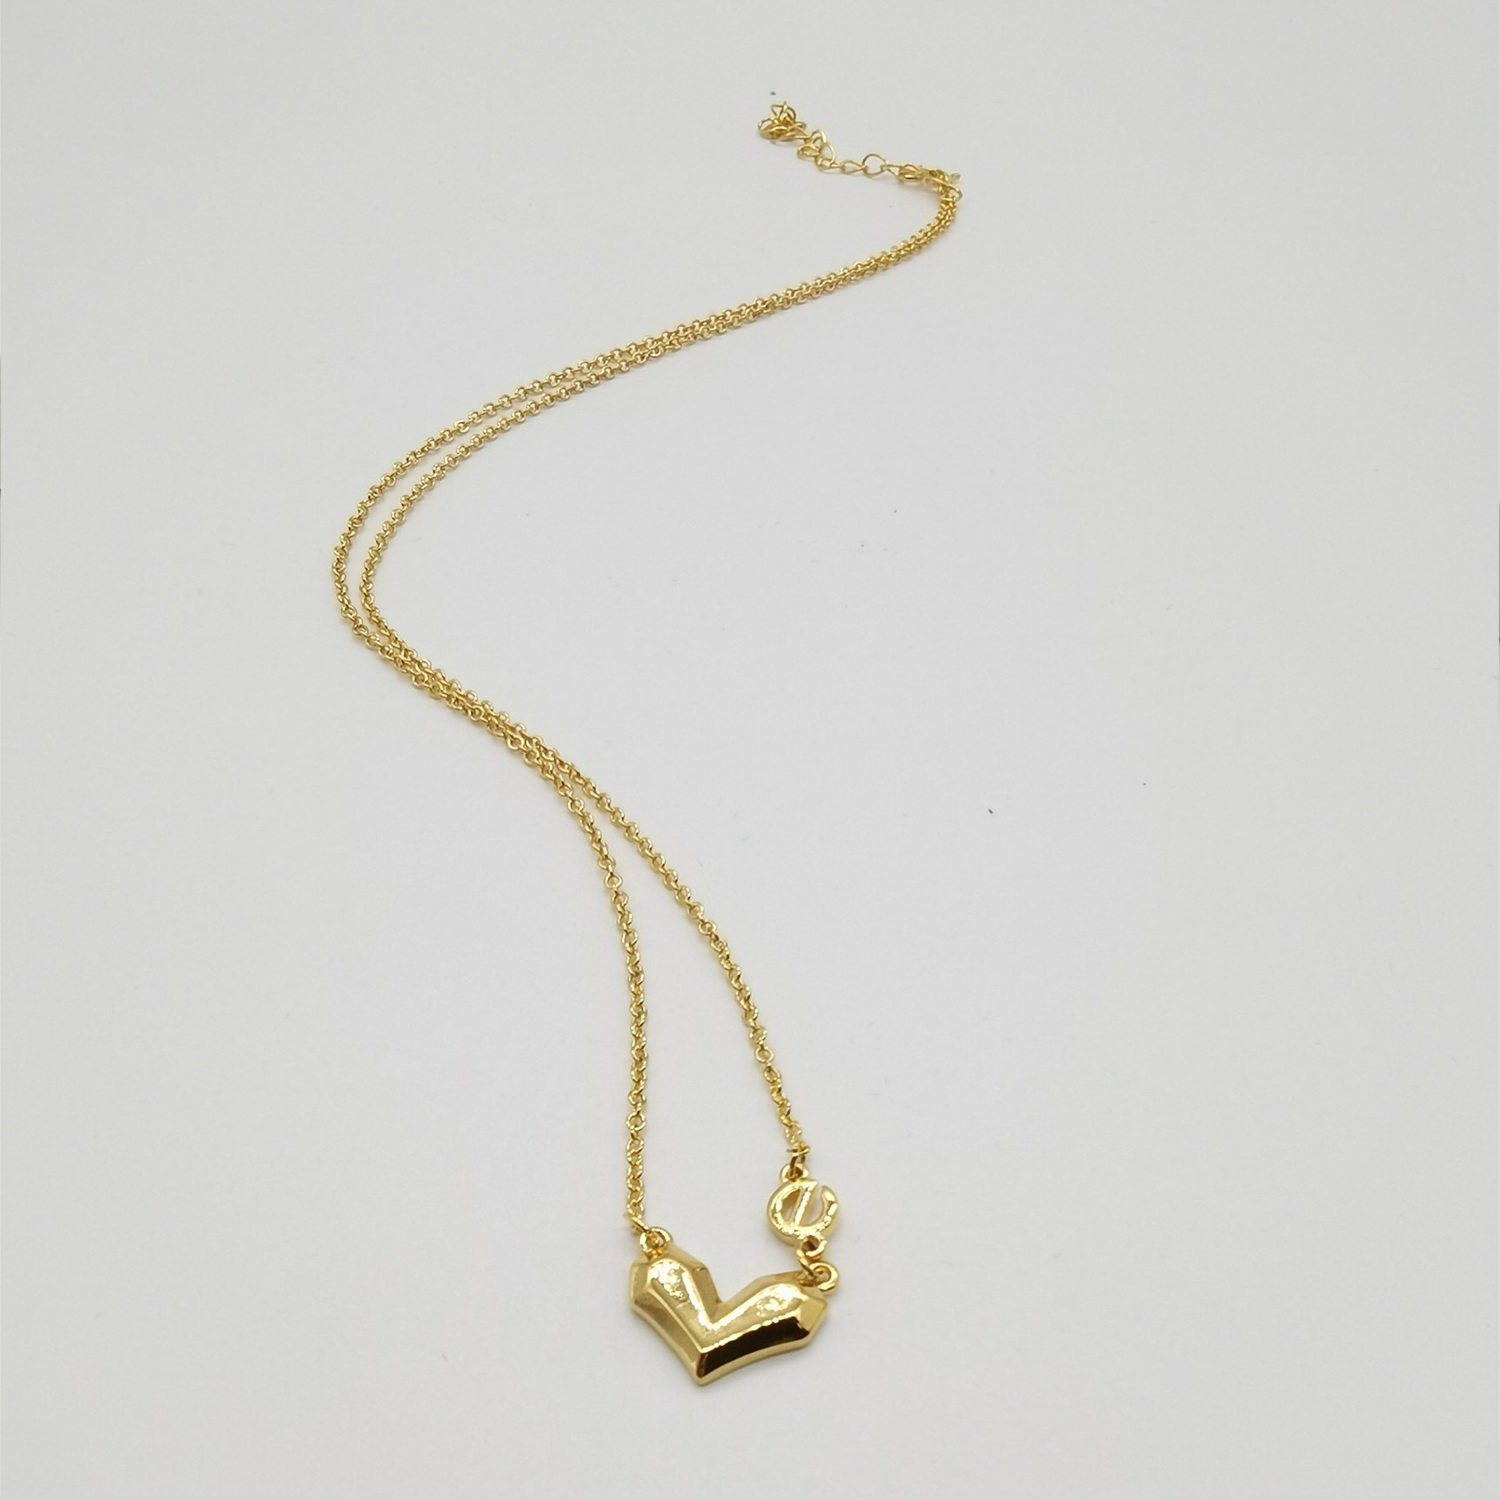 Alluvial gold vacuum electroplating 24K gold love you wholeheartedly e heart necklace